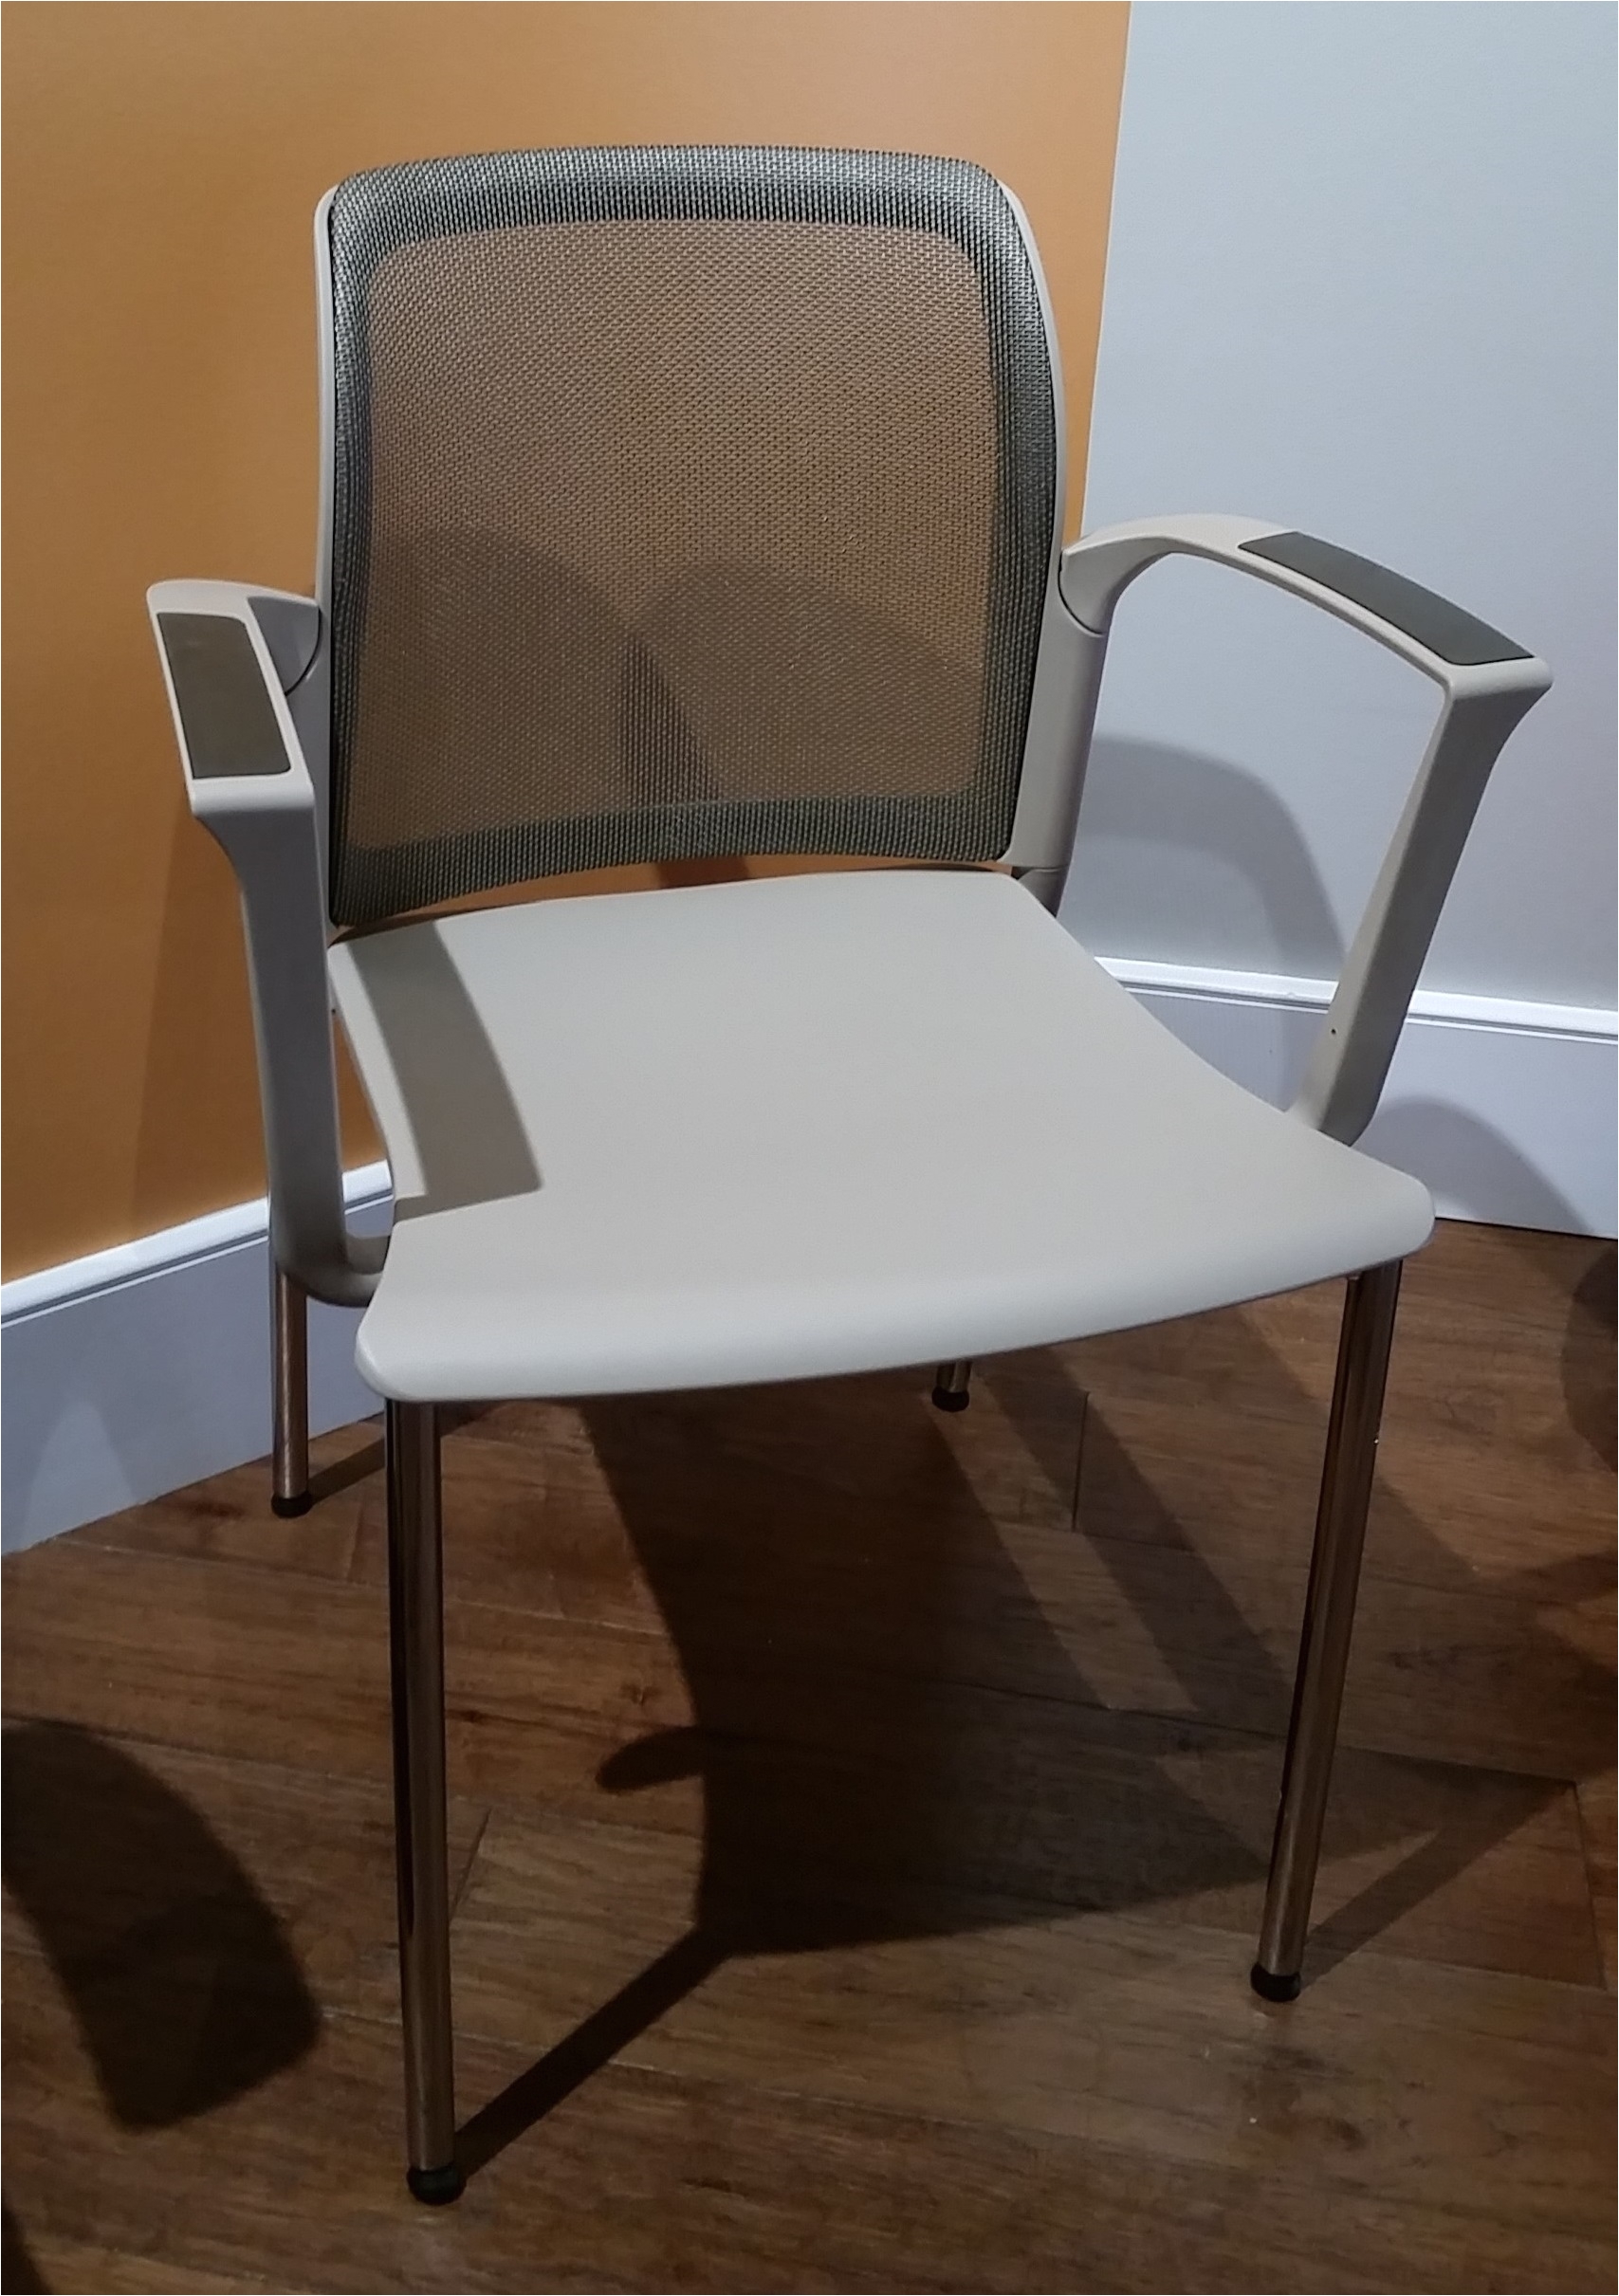 source stack chairs